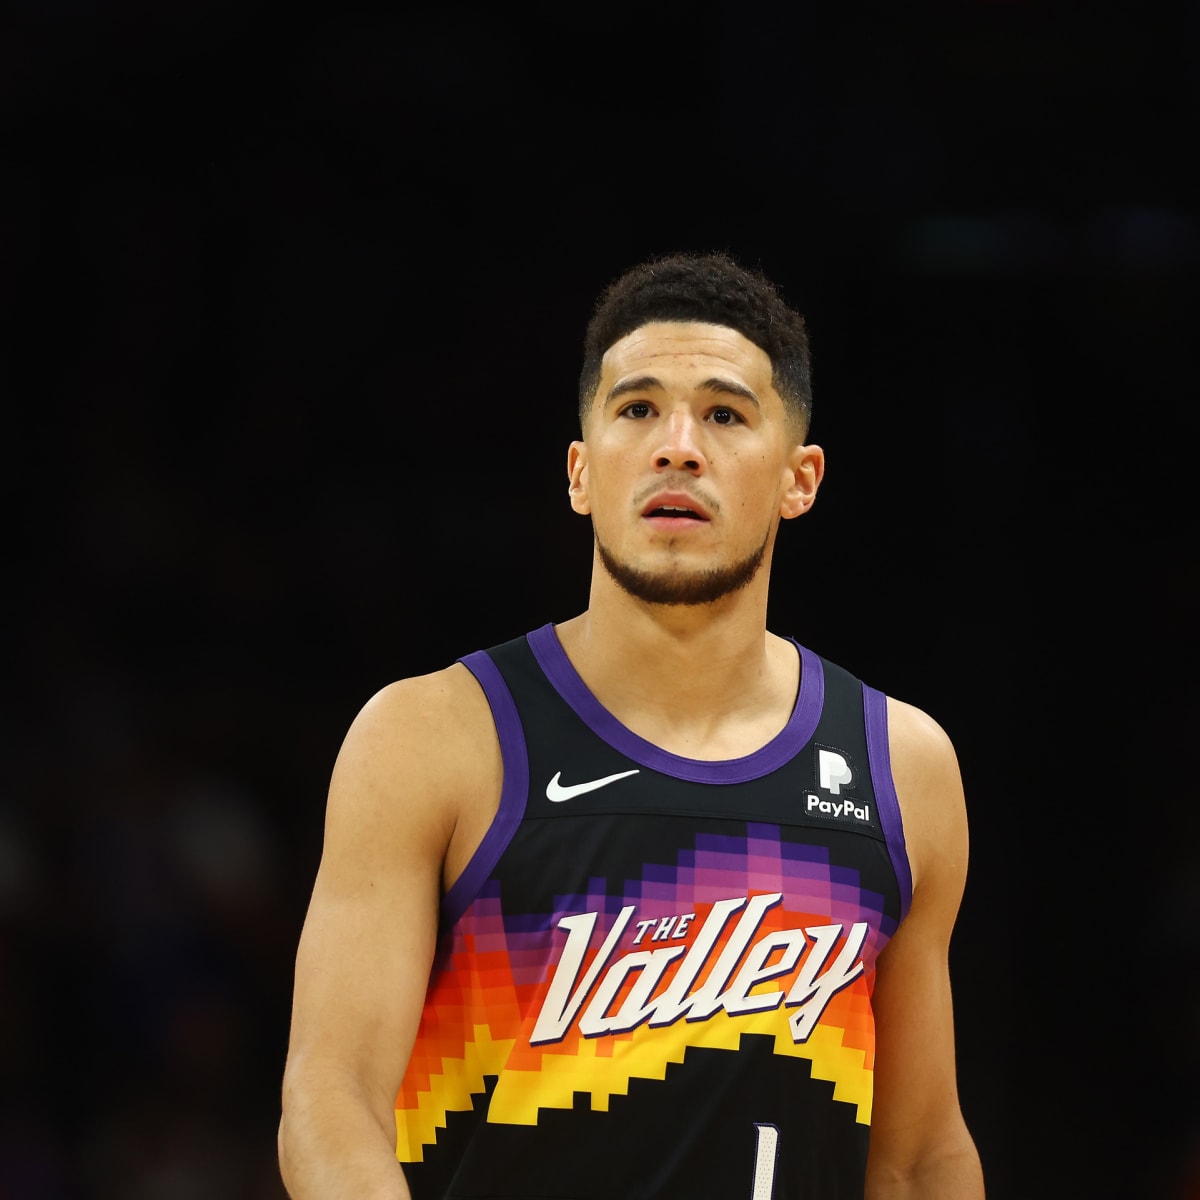 Suns Guard Devin Booker Likely to Become Eligible for Huge Supermax  Extension - Sports Illustrated Inside The Suns News, Analysis and More